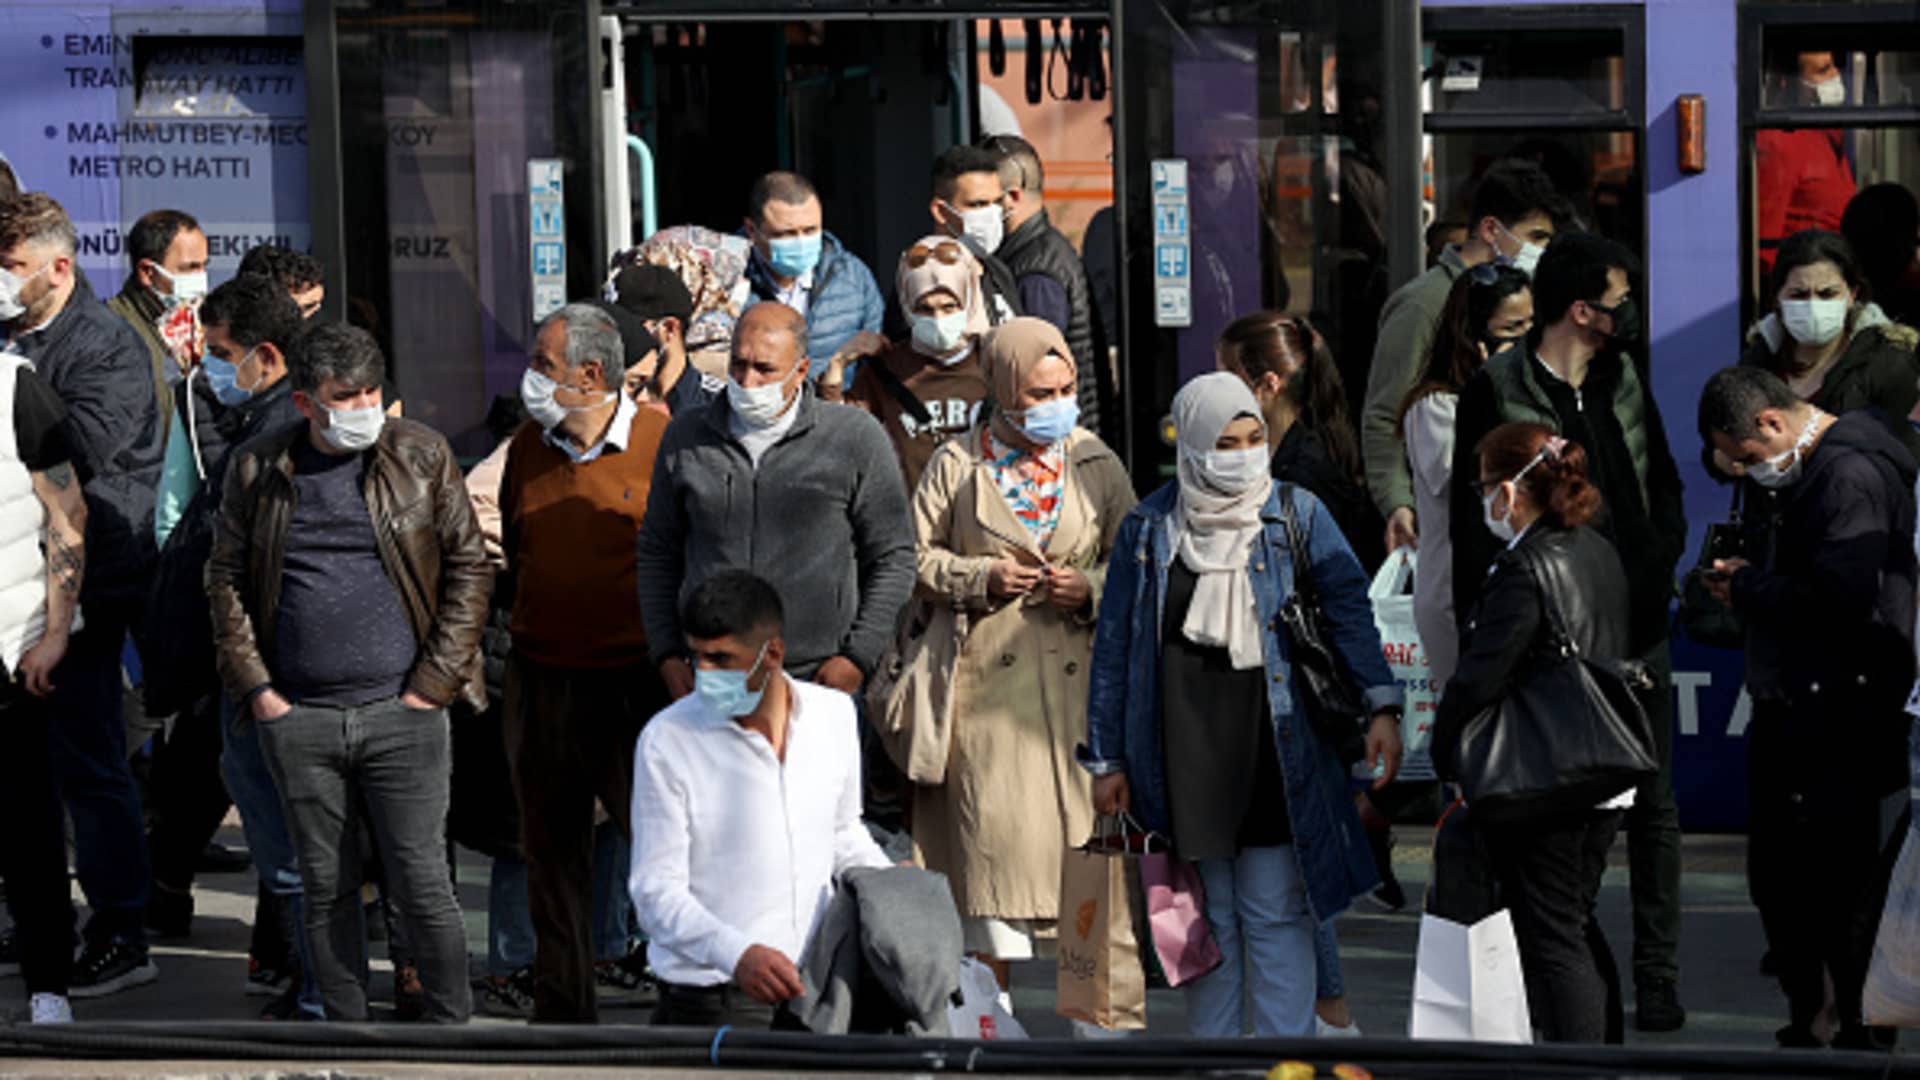 ISTANBUL, TURKEY - APRIL 29: People wait in a queue at Cevizlibag district to get on metrobuses and trams to return their homes ahead of full lockdown from Thursday evening until May 17 to stem the spread of coronavirus in Istanbul, Turkey on April 29, 2021. (Photo by Isa Terli/Anadolu Agency via Getty Images)